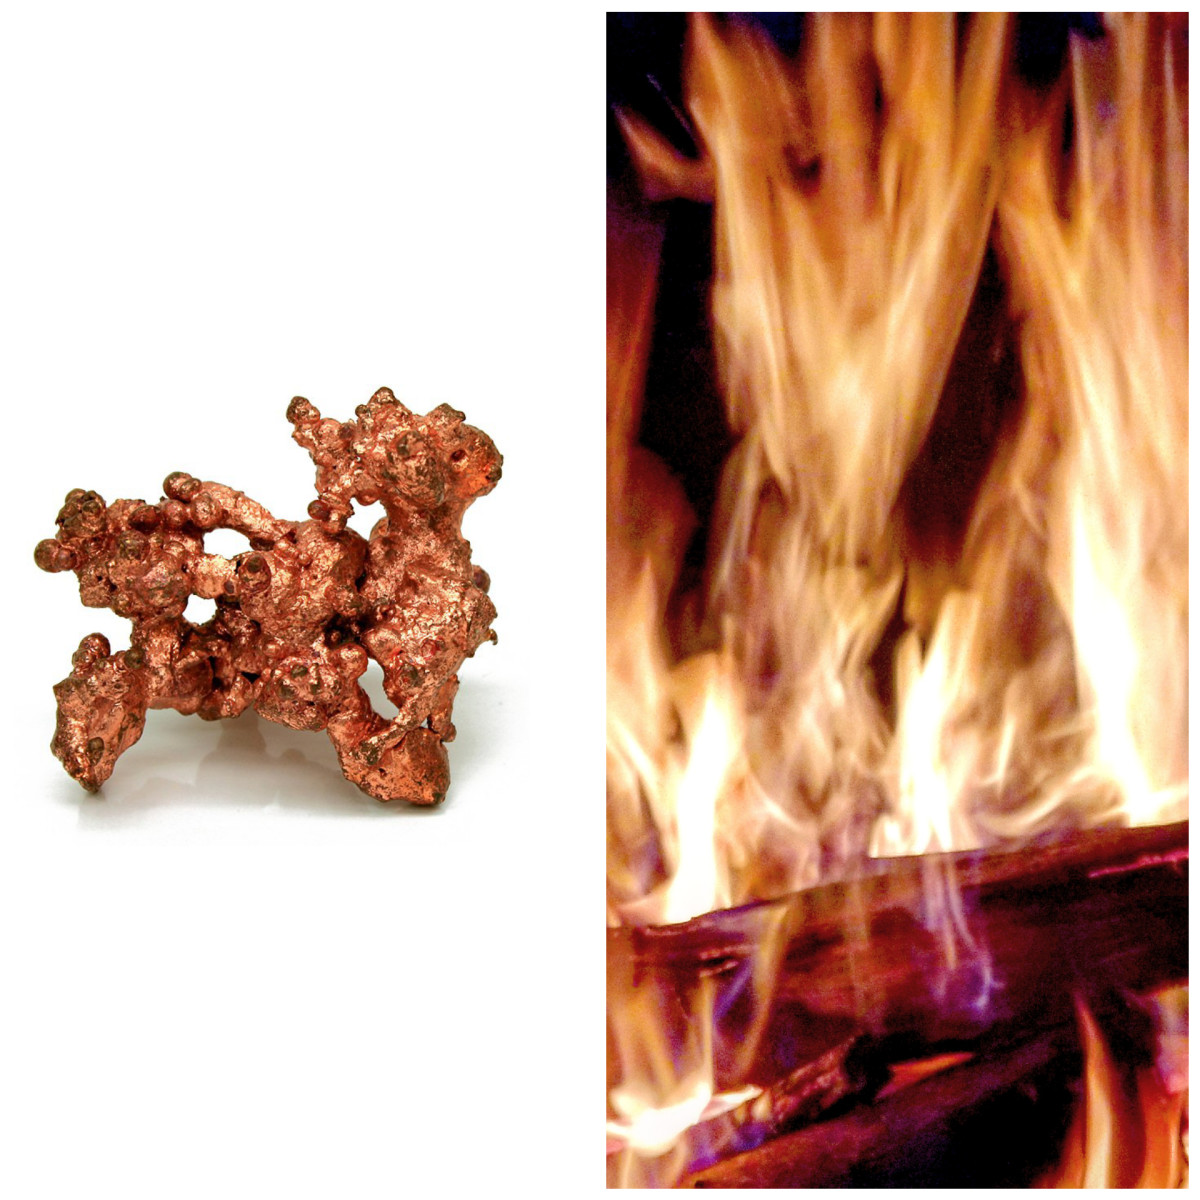 Copper and fire are symbols of Judgment